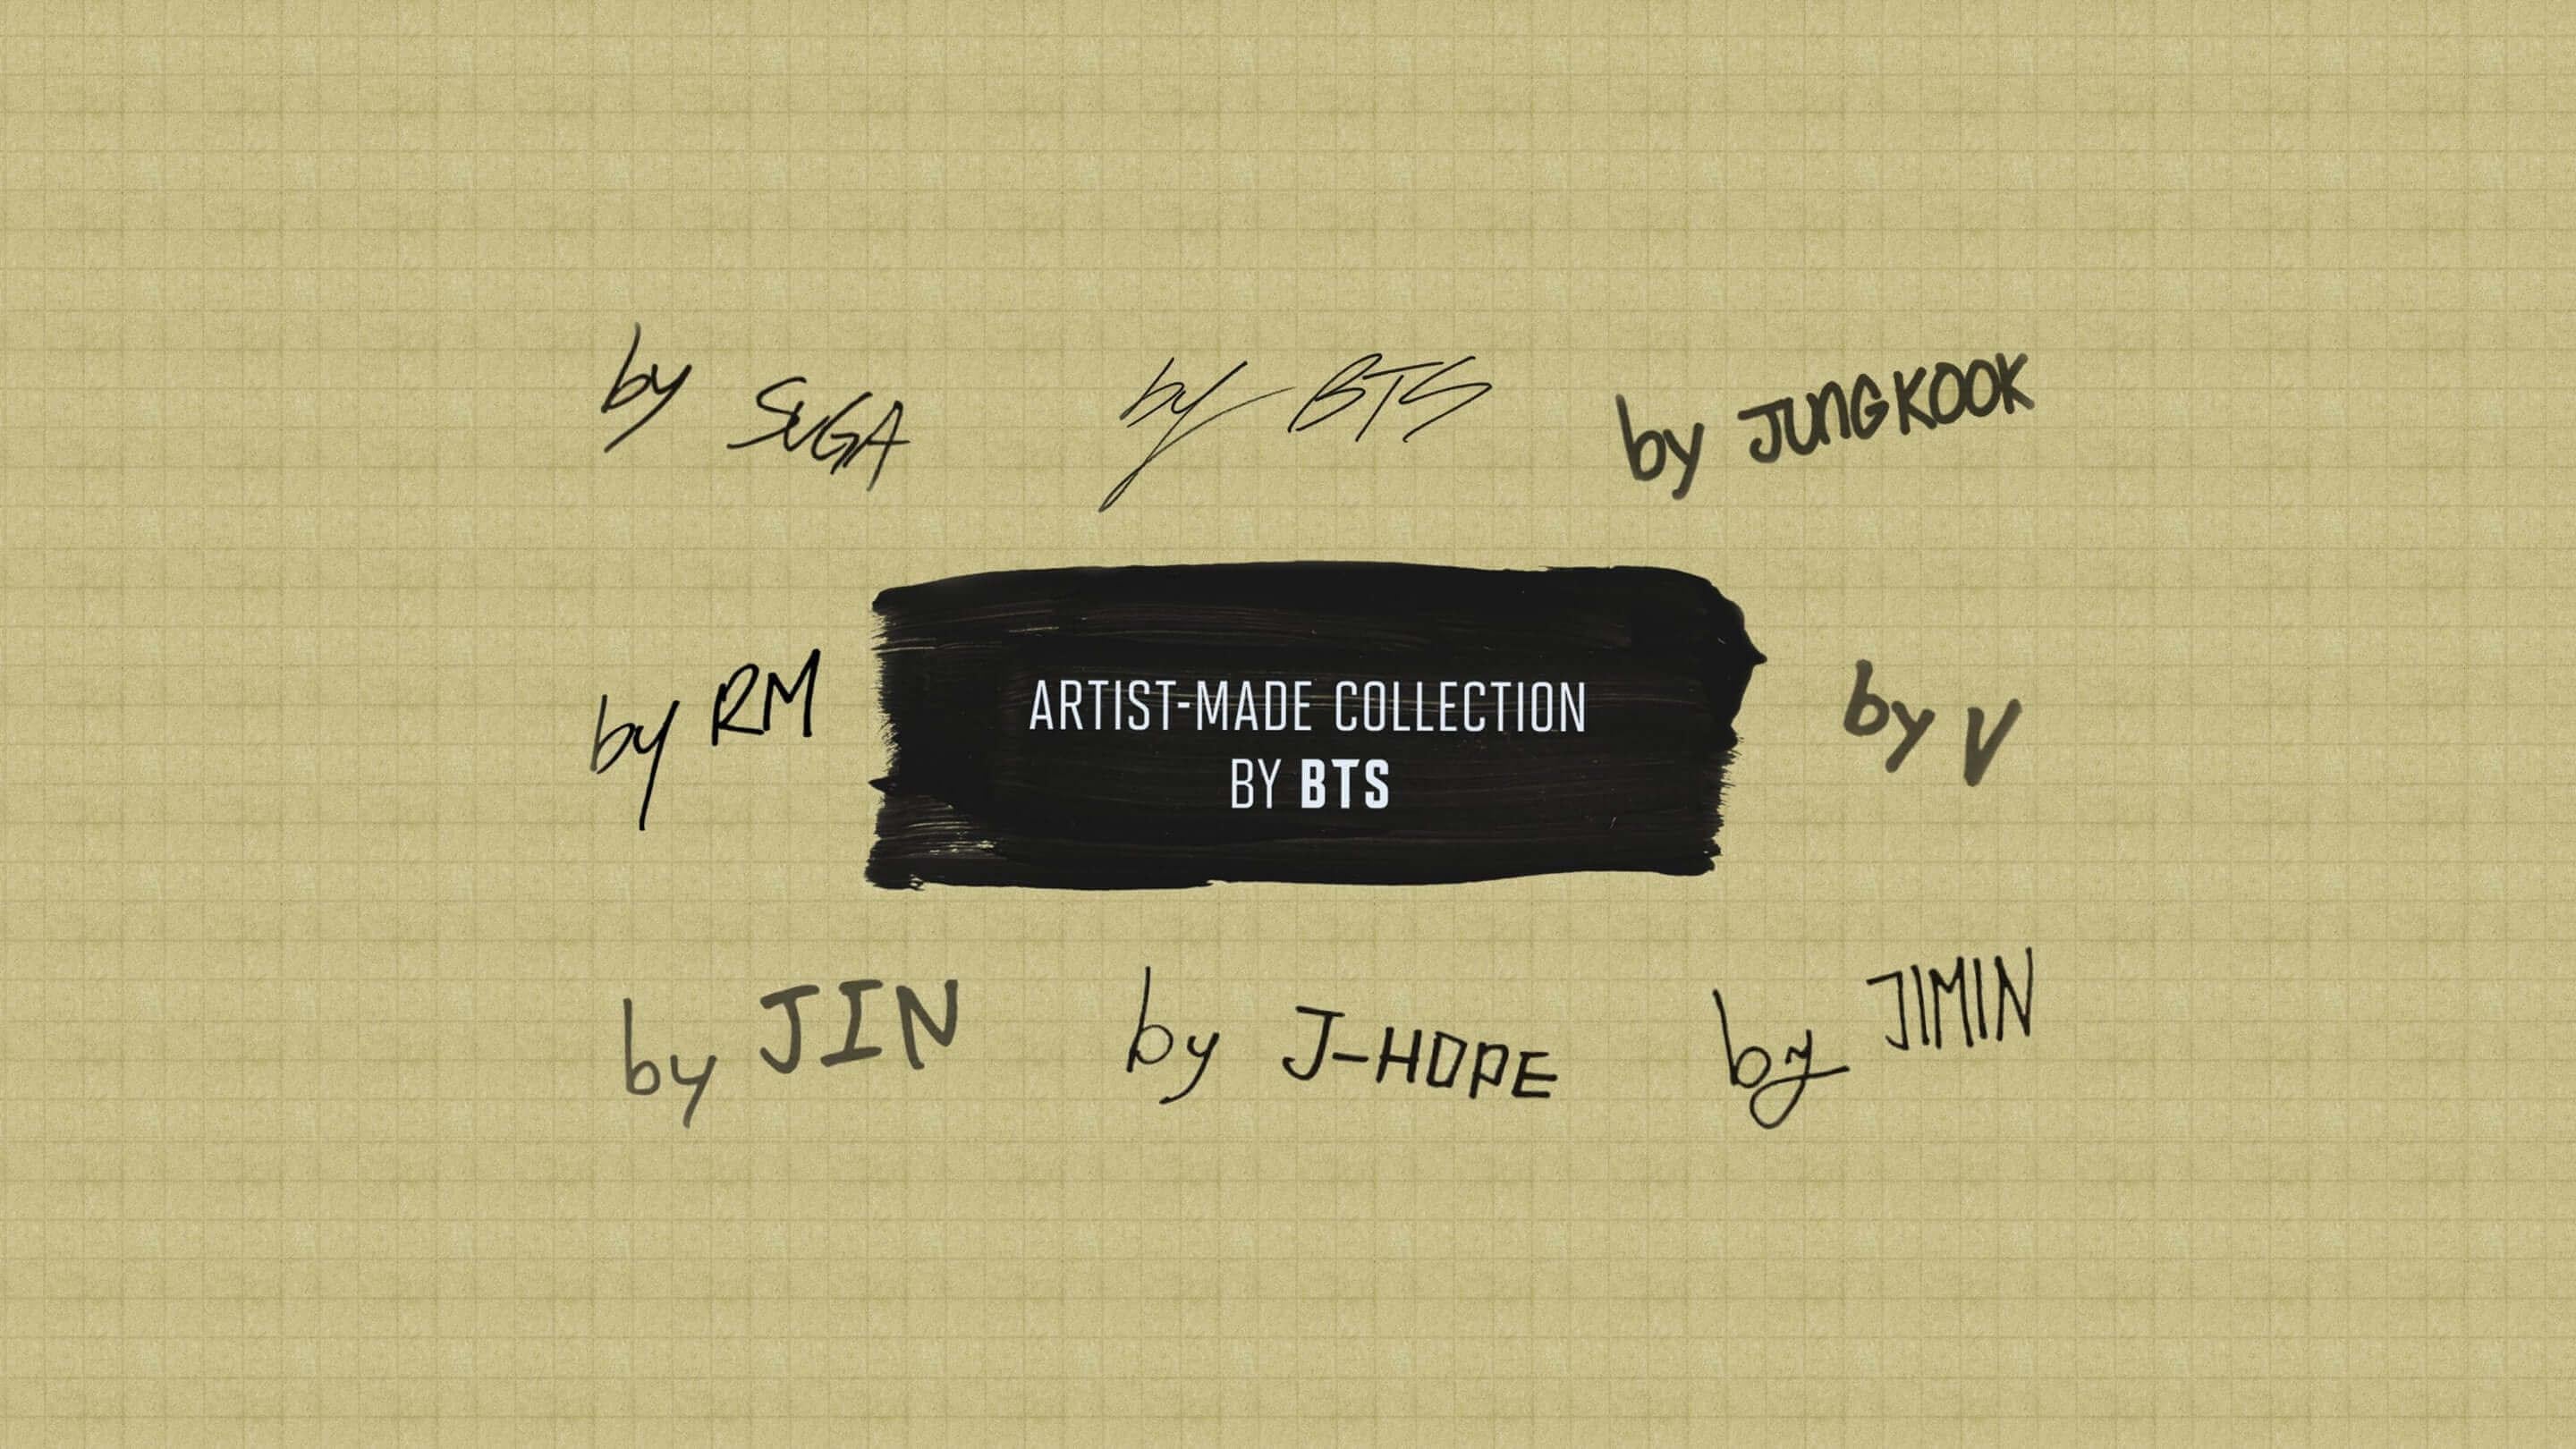 ARTIST-MADE COLLECTION BY BTS | Your Kpop Store - Daebak